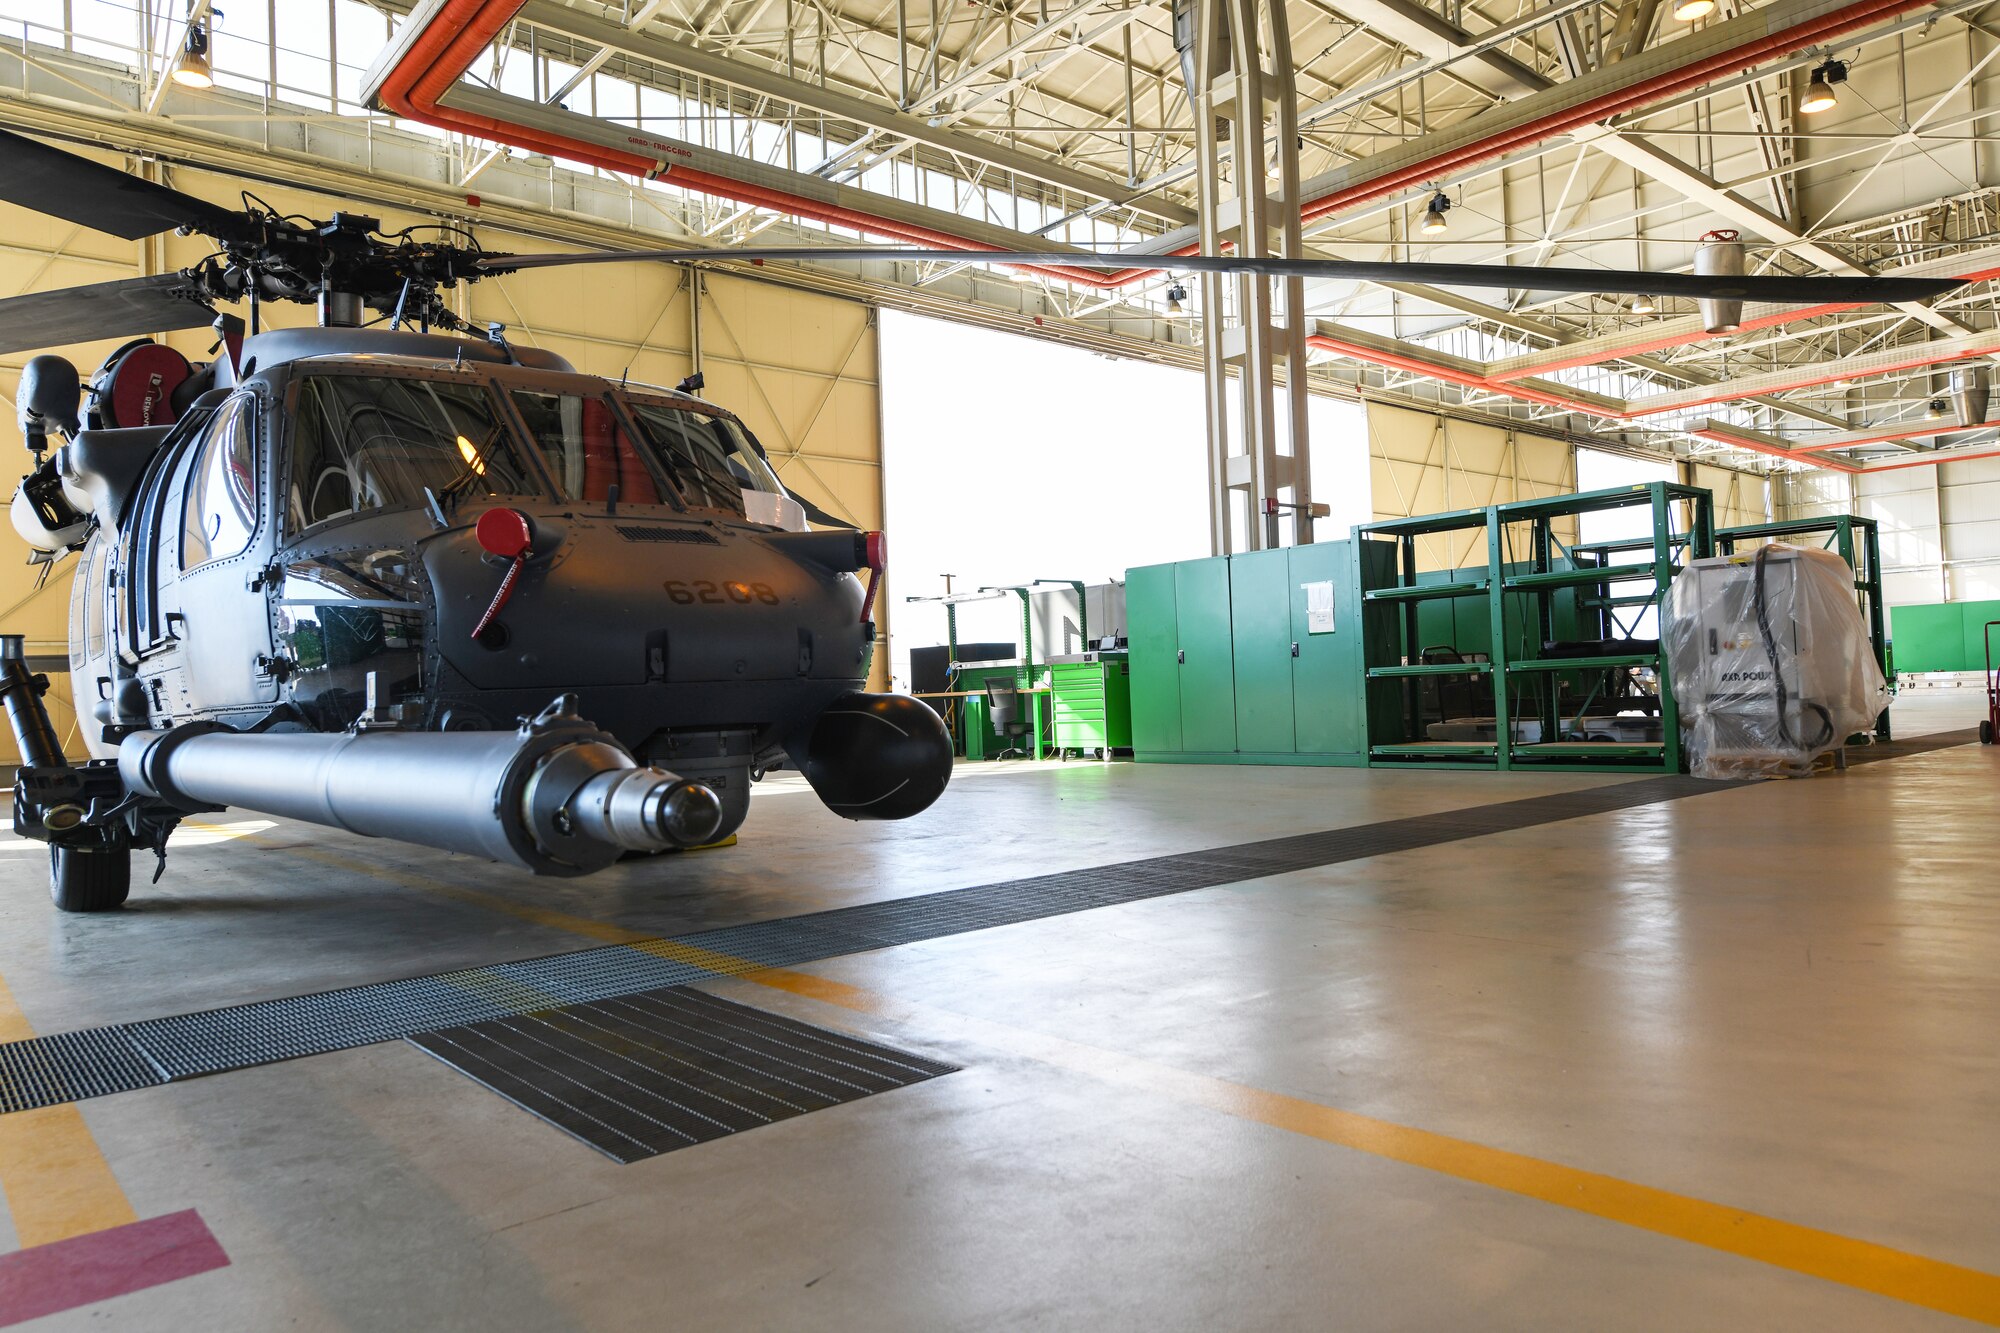 The 56th HMU sets roots in Aviano July 14, 2020 at Aviano Air Base, Italy.The 56th Helicopter Maintenance Unit’s renovated a hangar with new flightline equipment at Aviano Air Base, Italy, July 14, 2020. The 56th HMU renovated various sections in hangar three. (U.S. Air Force photo by Airman 1st Class Ericka A. Woolever)